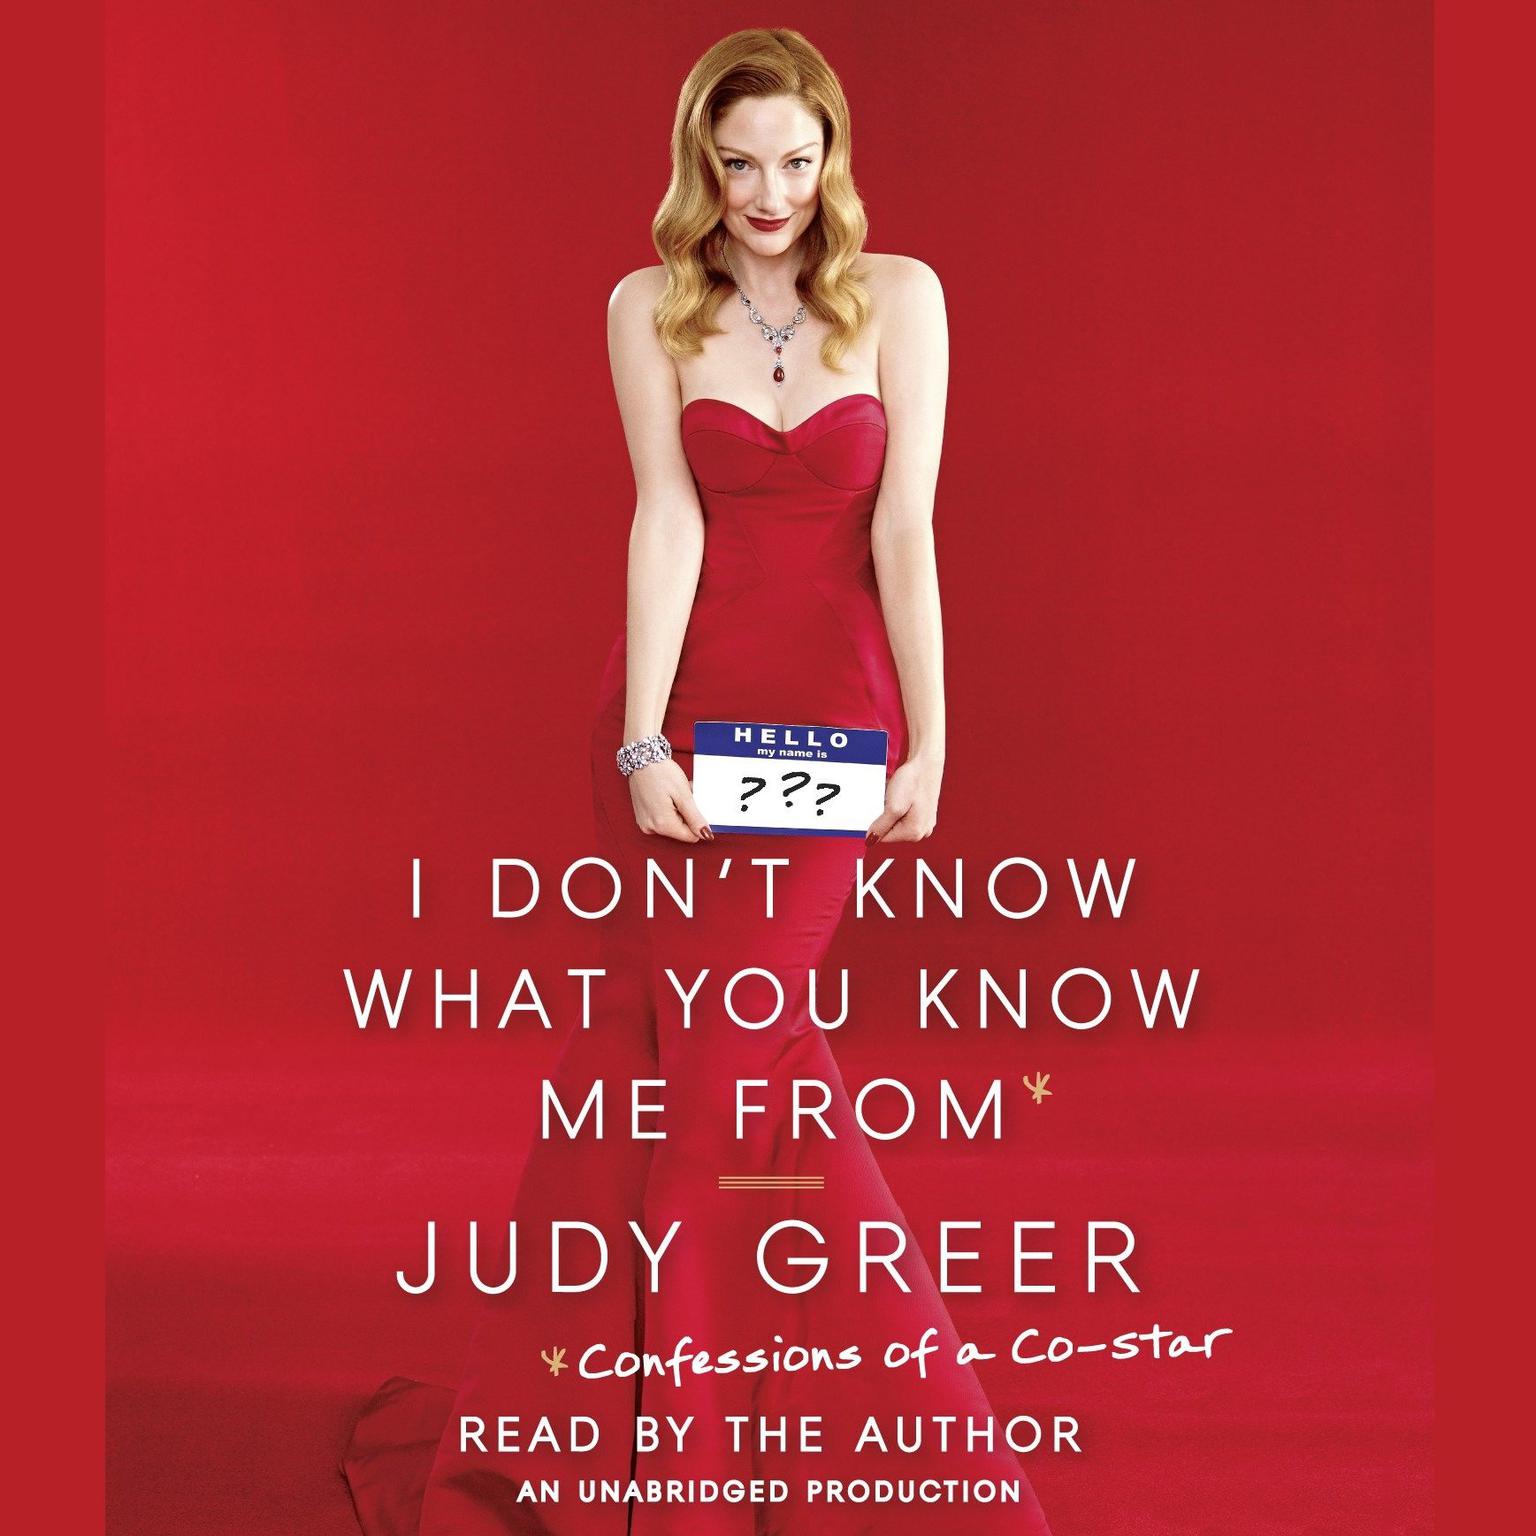 I Dont Know What You Know Me From: Confessions of a Co-Star Audiobook, by Judy Greer